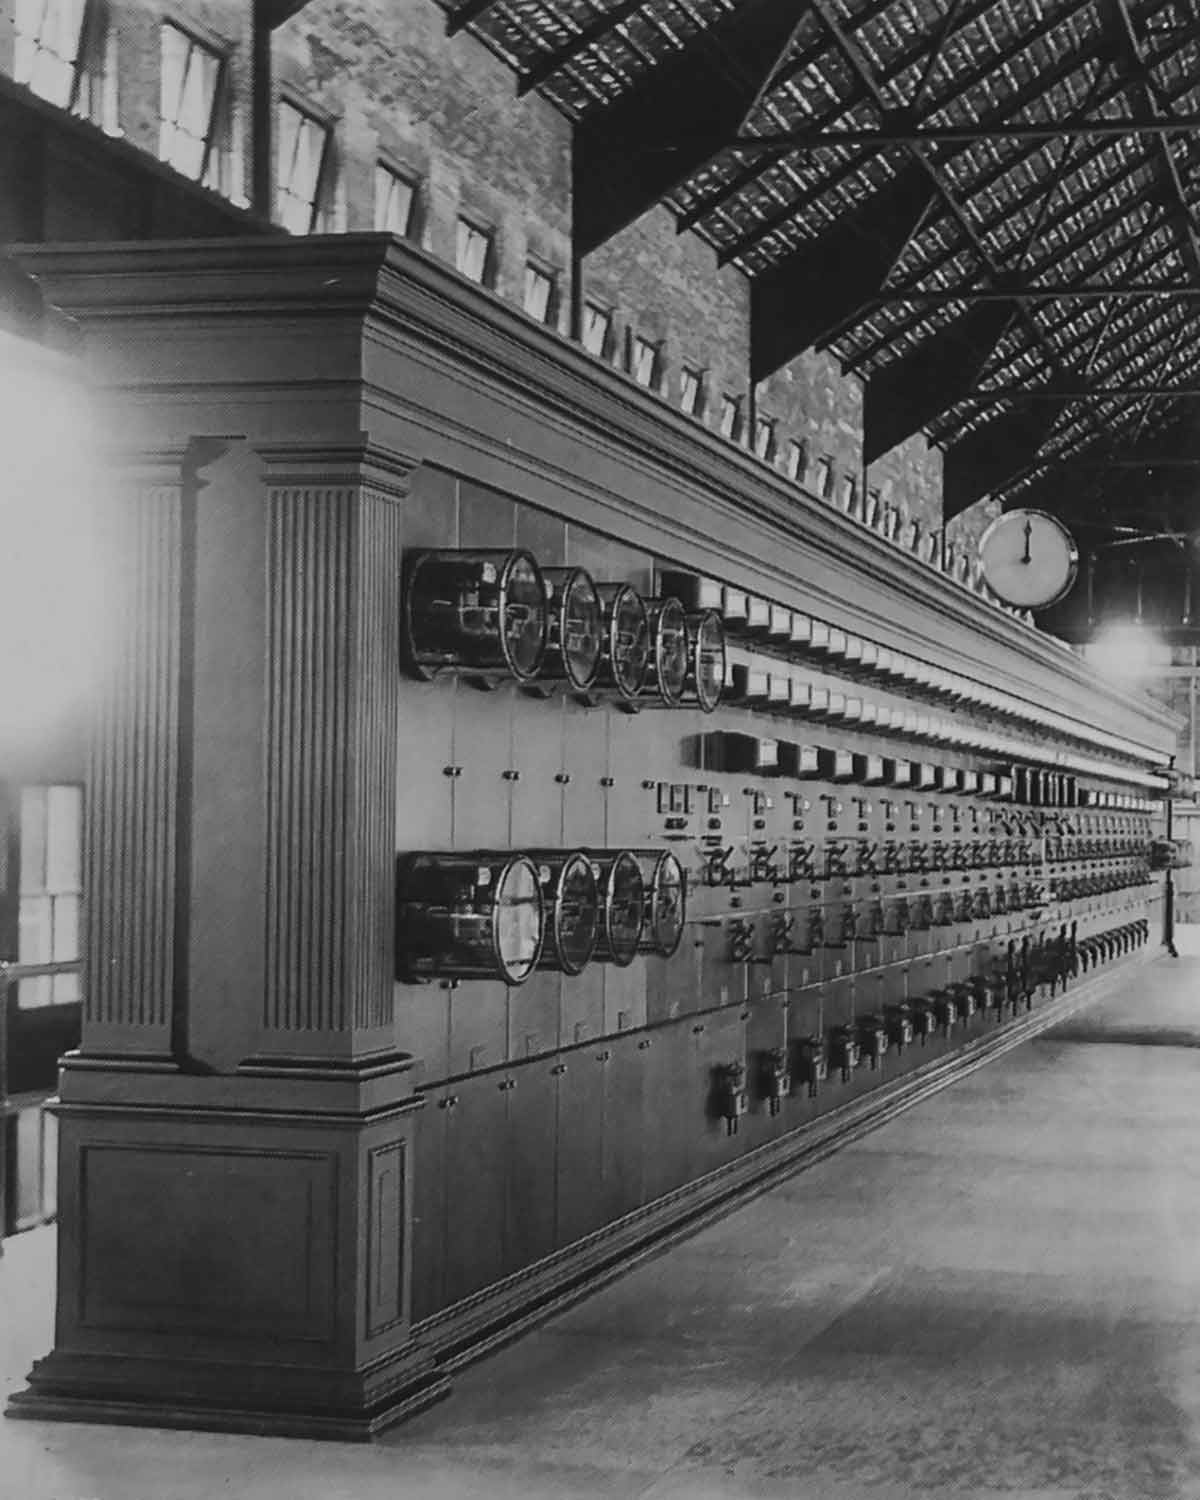 Archival photo from 1908 showing a bank of operating controls, dials, gauges and switches. Everything is mounted in a long wooden cabinet.